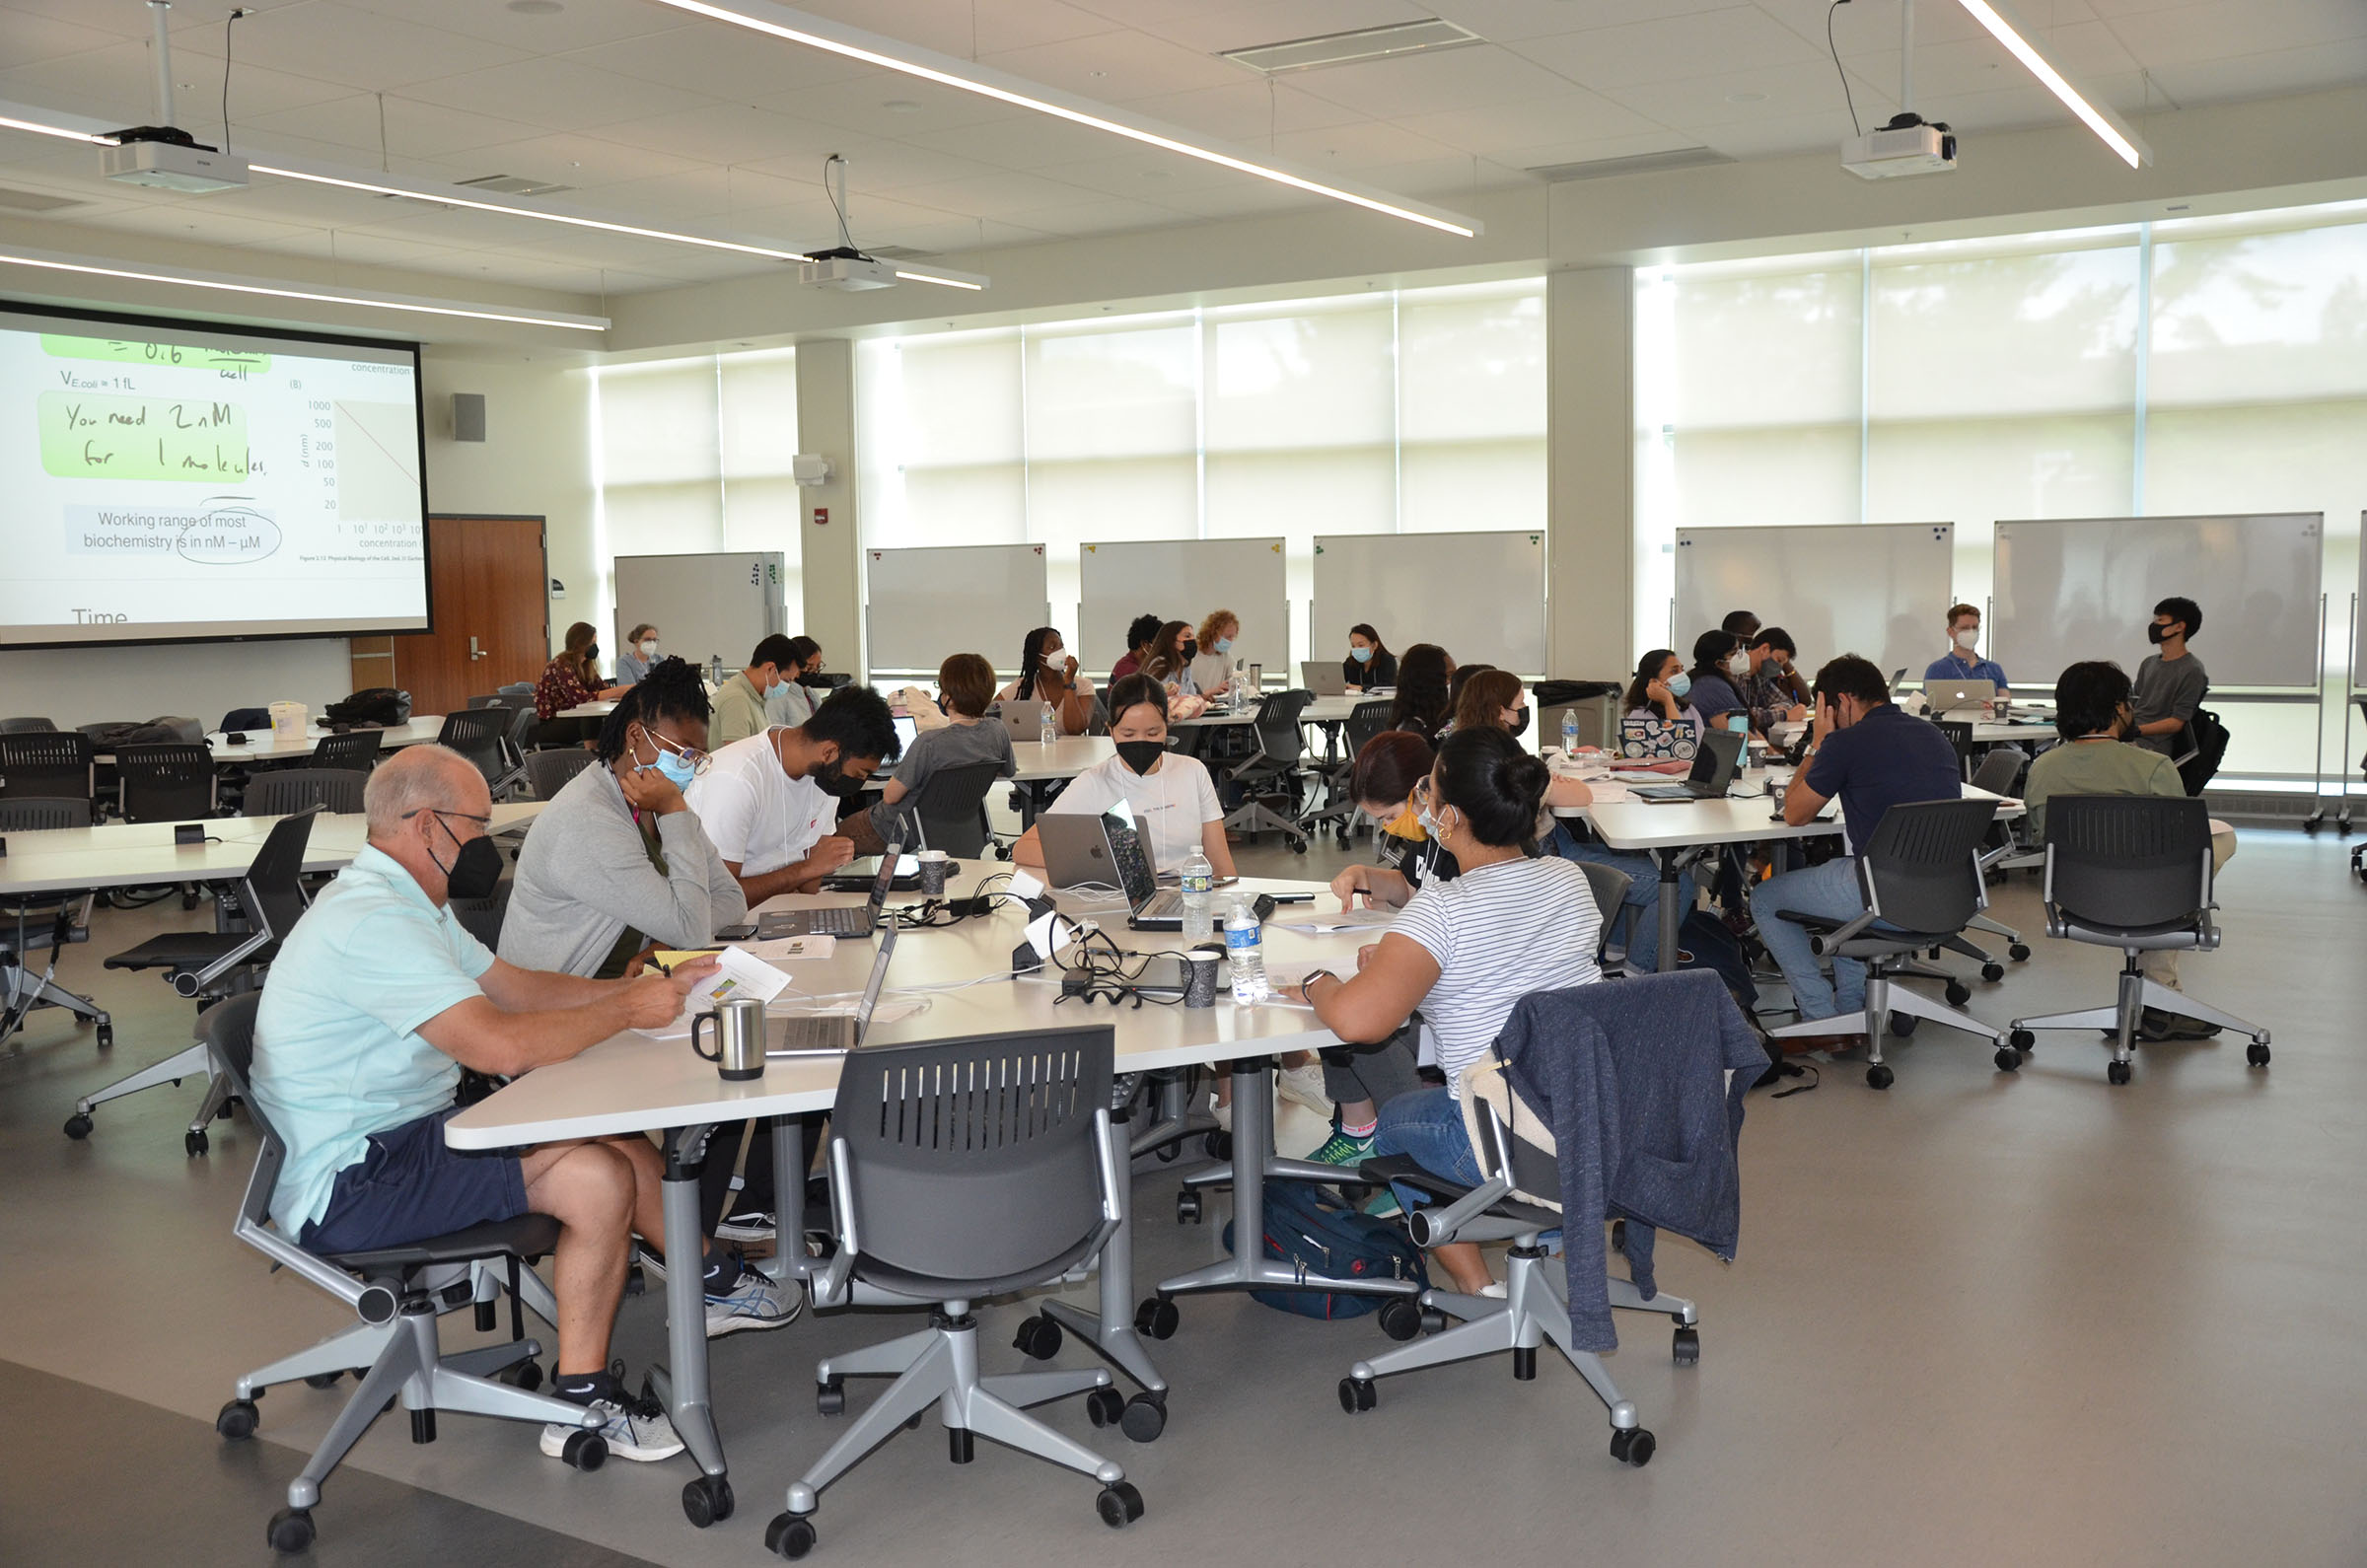 Participants worked collaboratively applying modeling and simulations to biological data